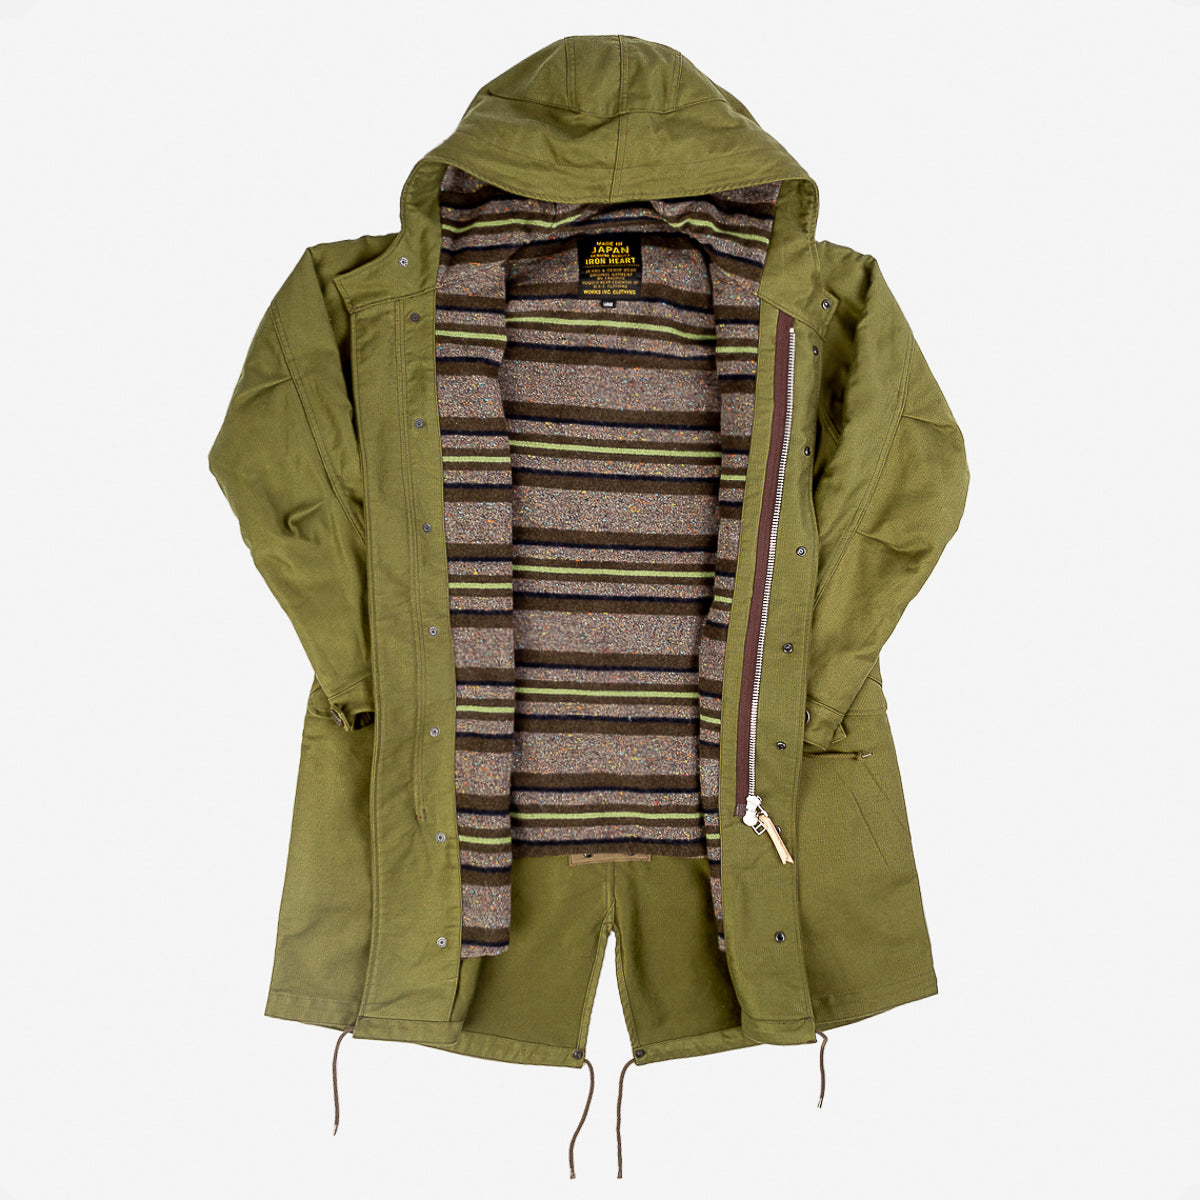 Iron Heart Whipcord Field Drab Olive – Coat M-51 IHM-34